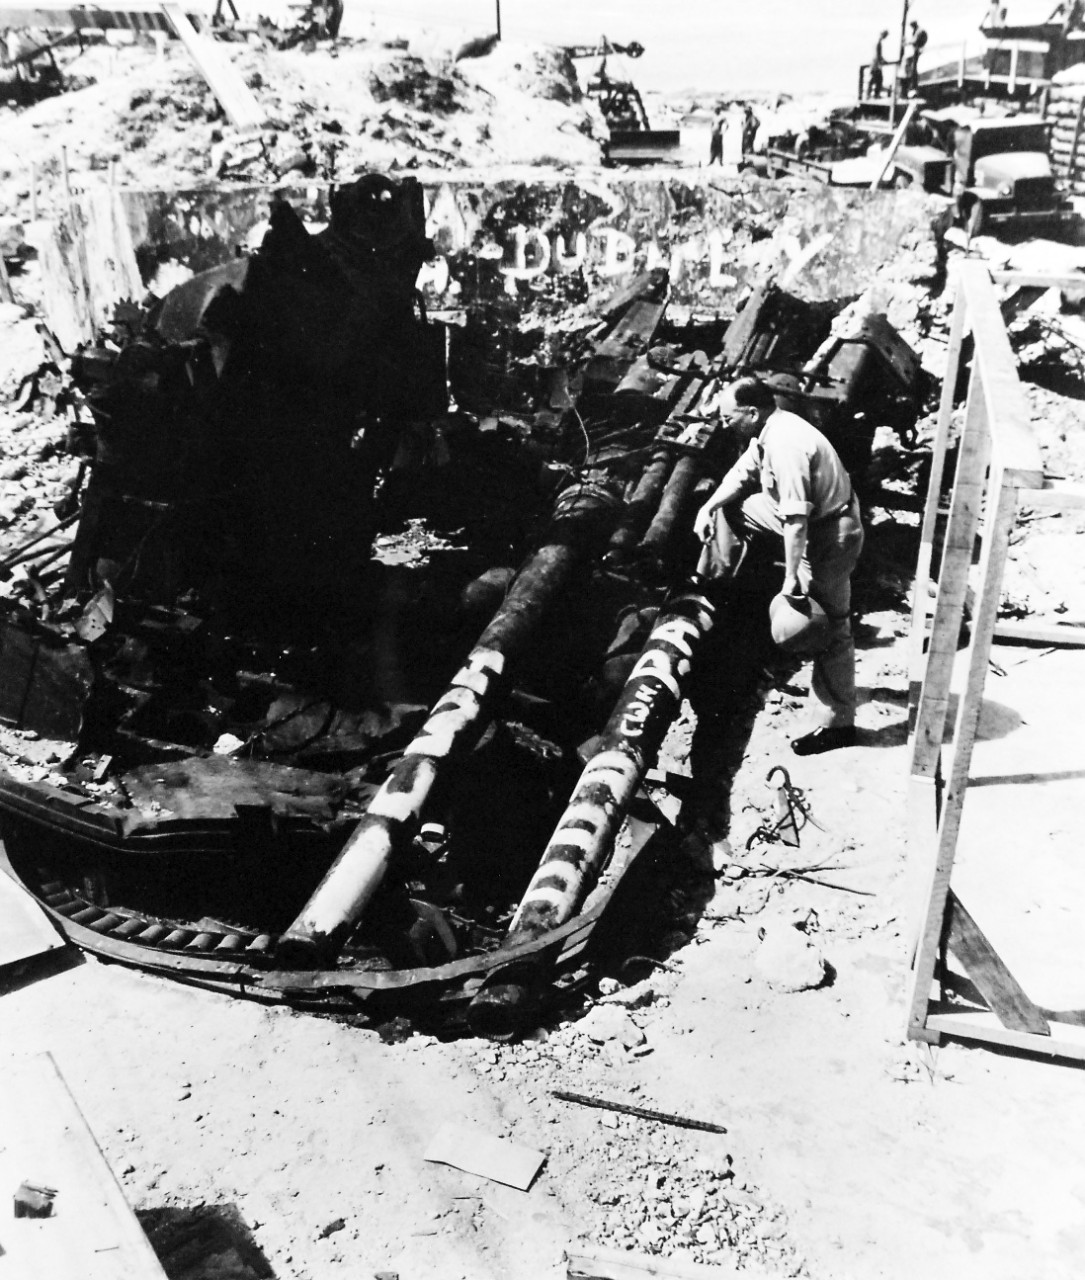 80-G-46525:   Operation Flintlock, February 1944.  Captured Japanese twin gun, Kwajalein Island, Kwajalein Atoll, Marshall Islands, blasted off its mount by U.S. bombardment.  Released September 19, 1944.  Official U.S. Navy Photograph, now in the collections of the National Archives.  (2016/06/07).